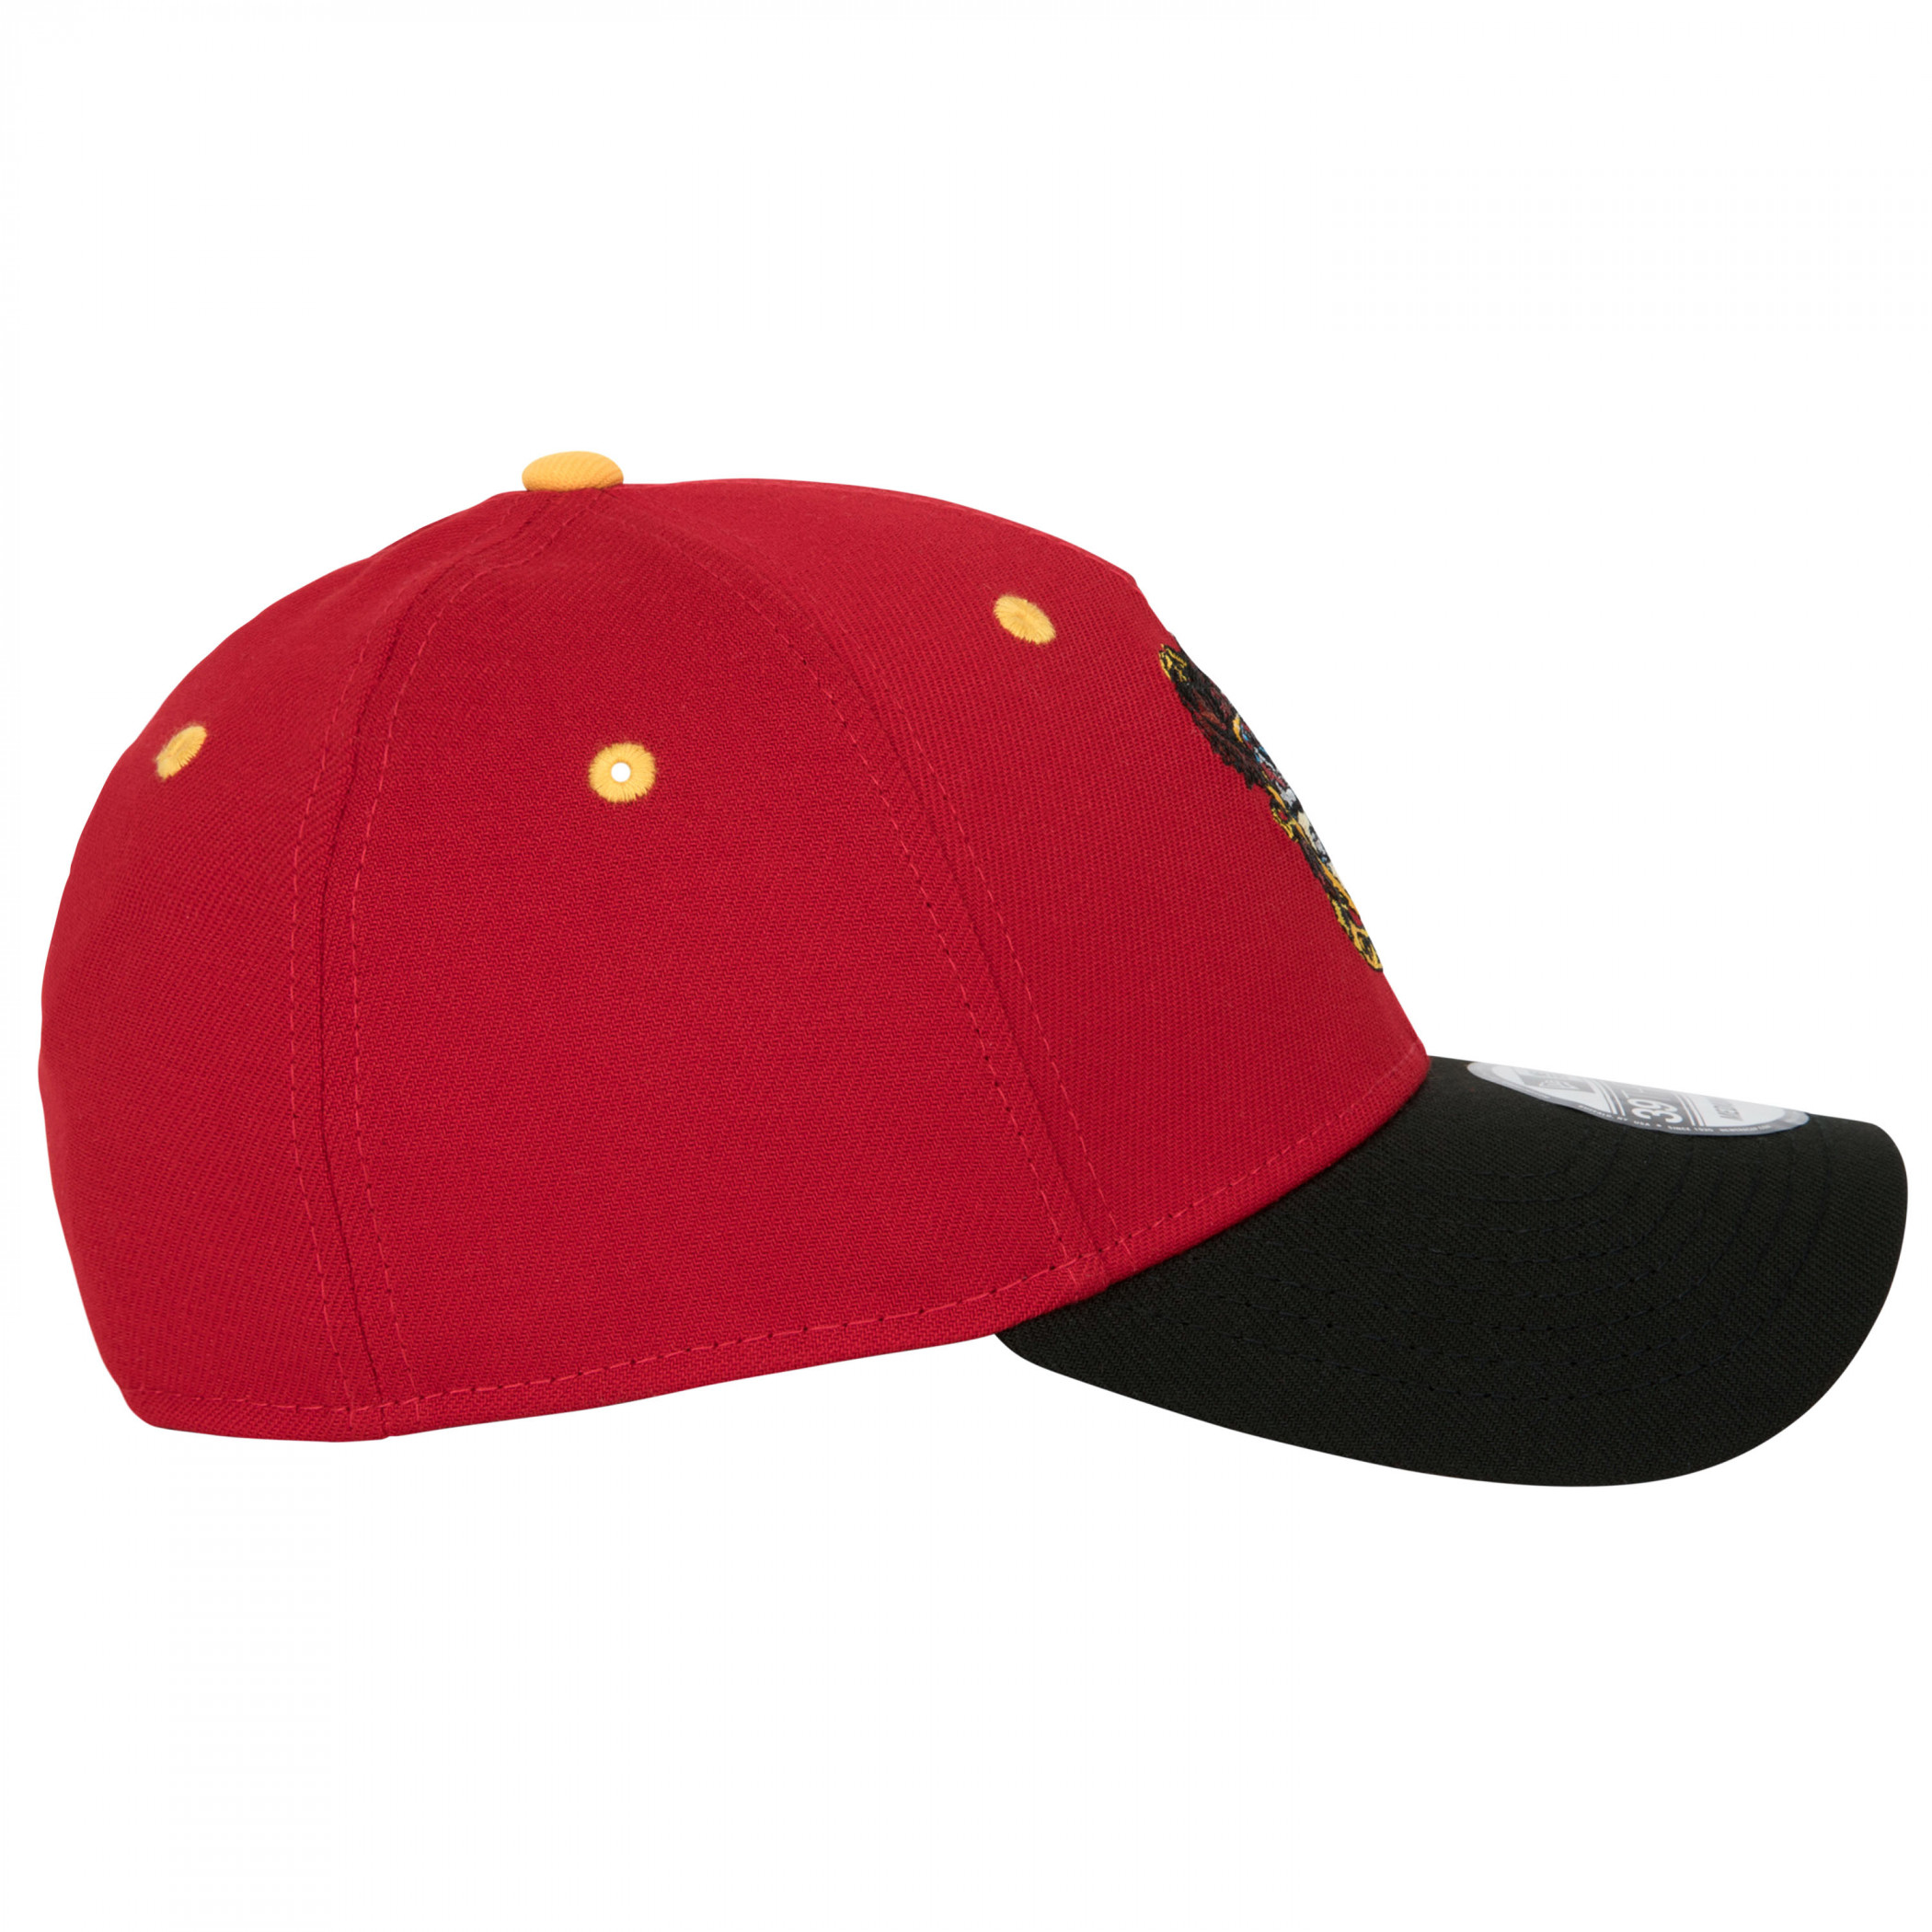 Harry Potter Gryffindor Crest New Era 39Thirty Fitted Hat